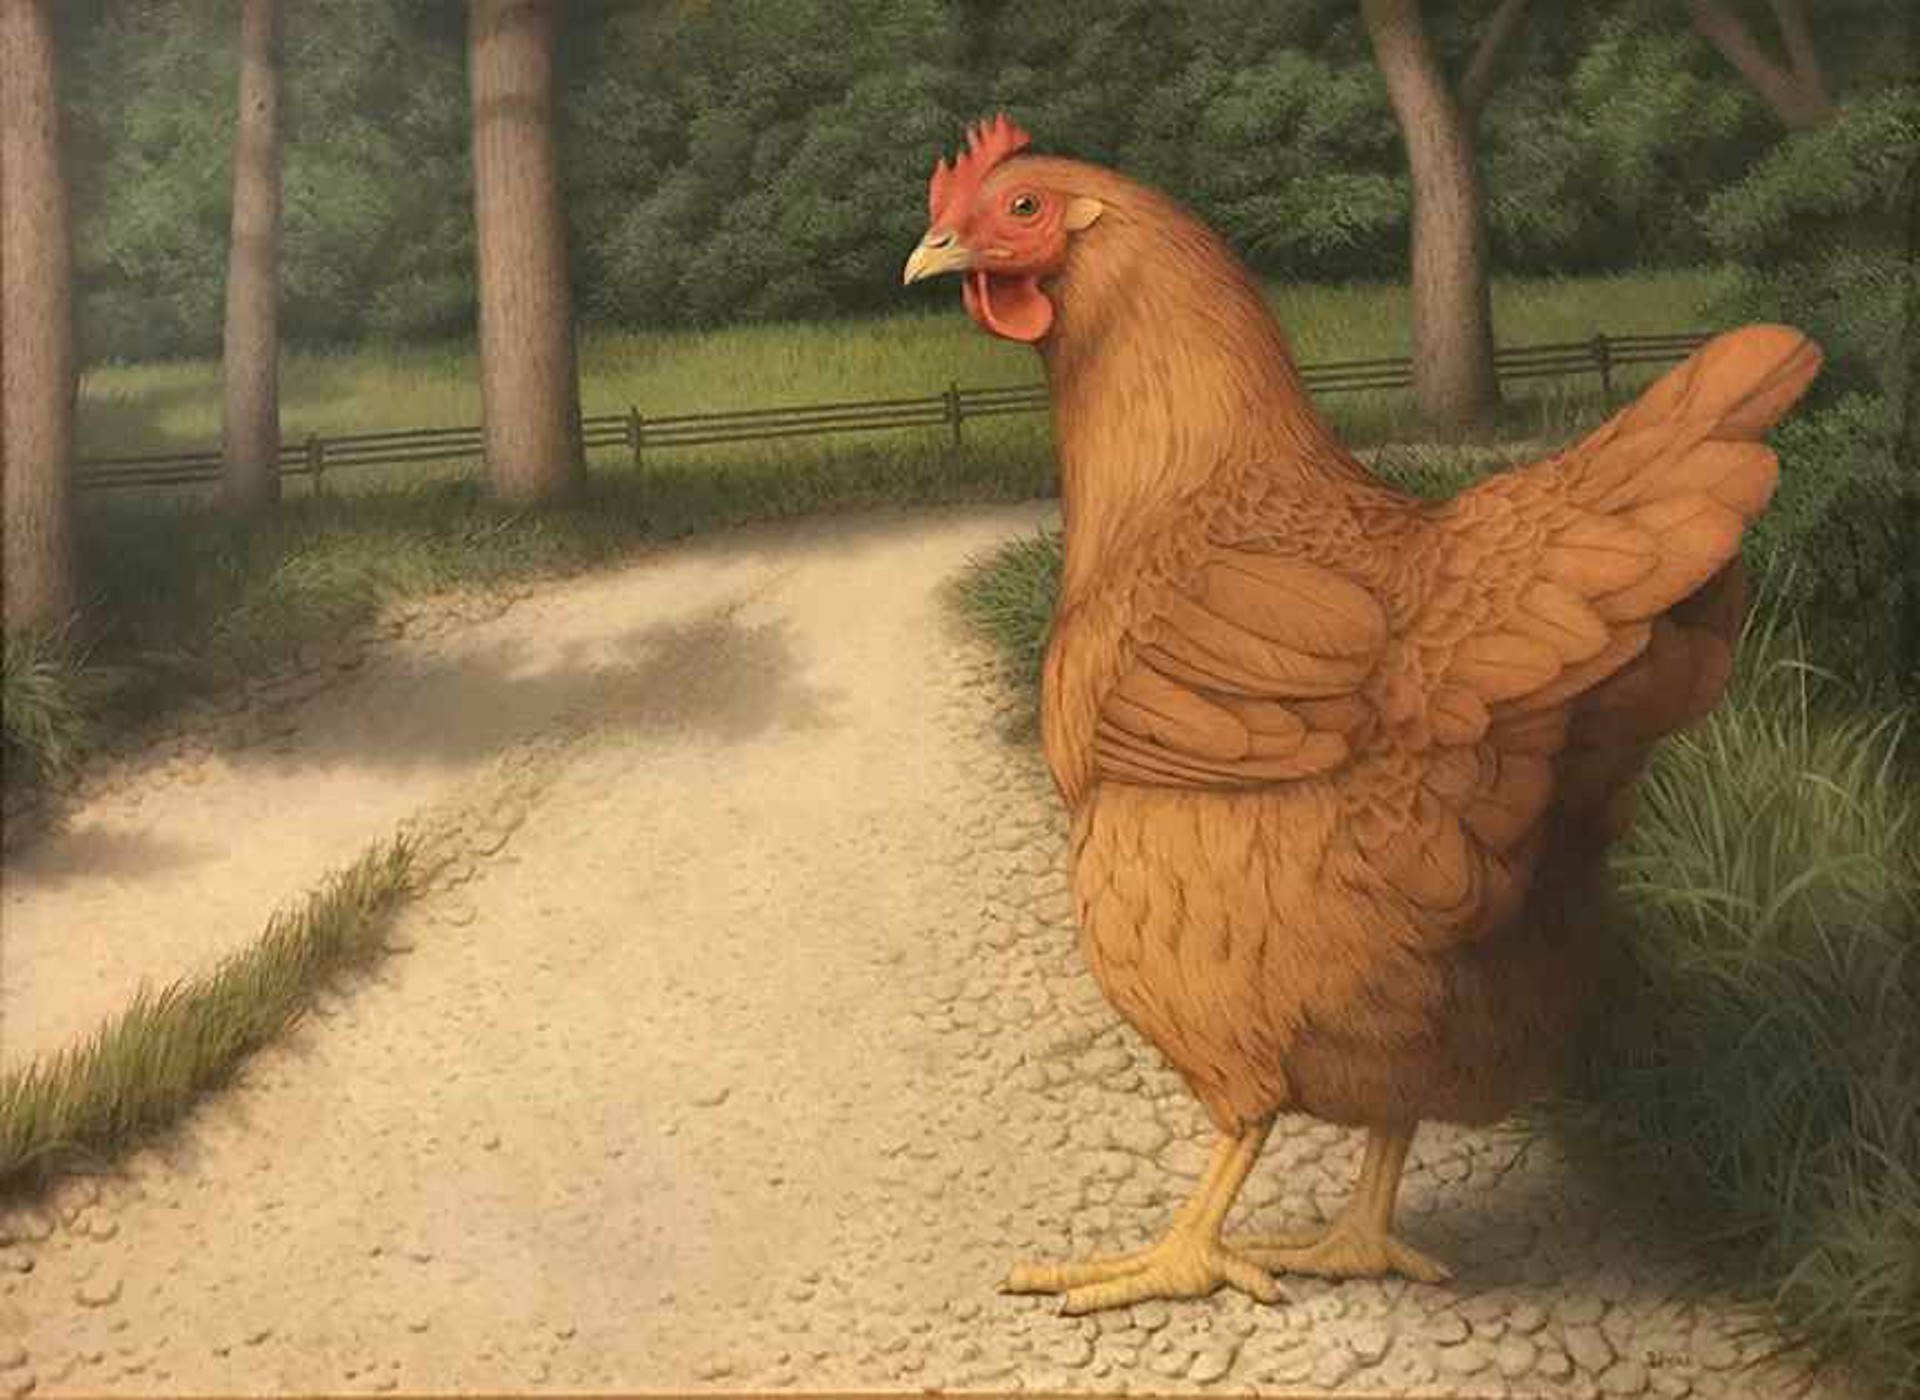 Why Did The Chicken Cross The Road? by Tom Palmore